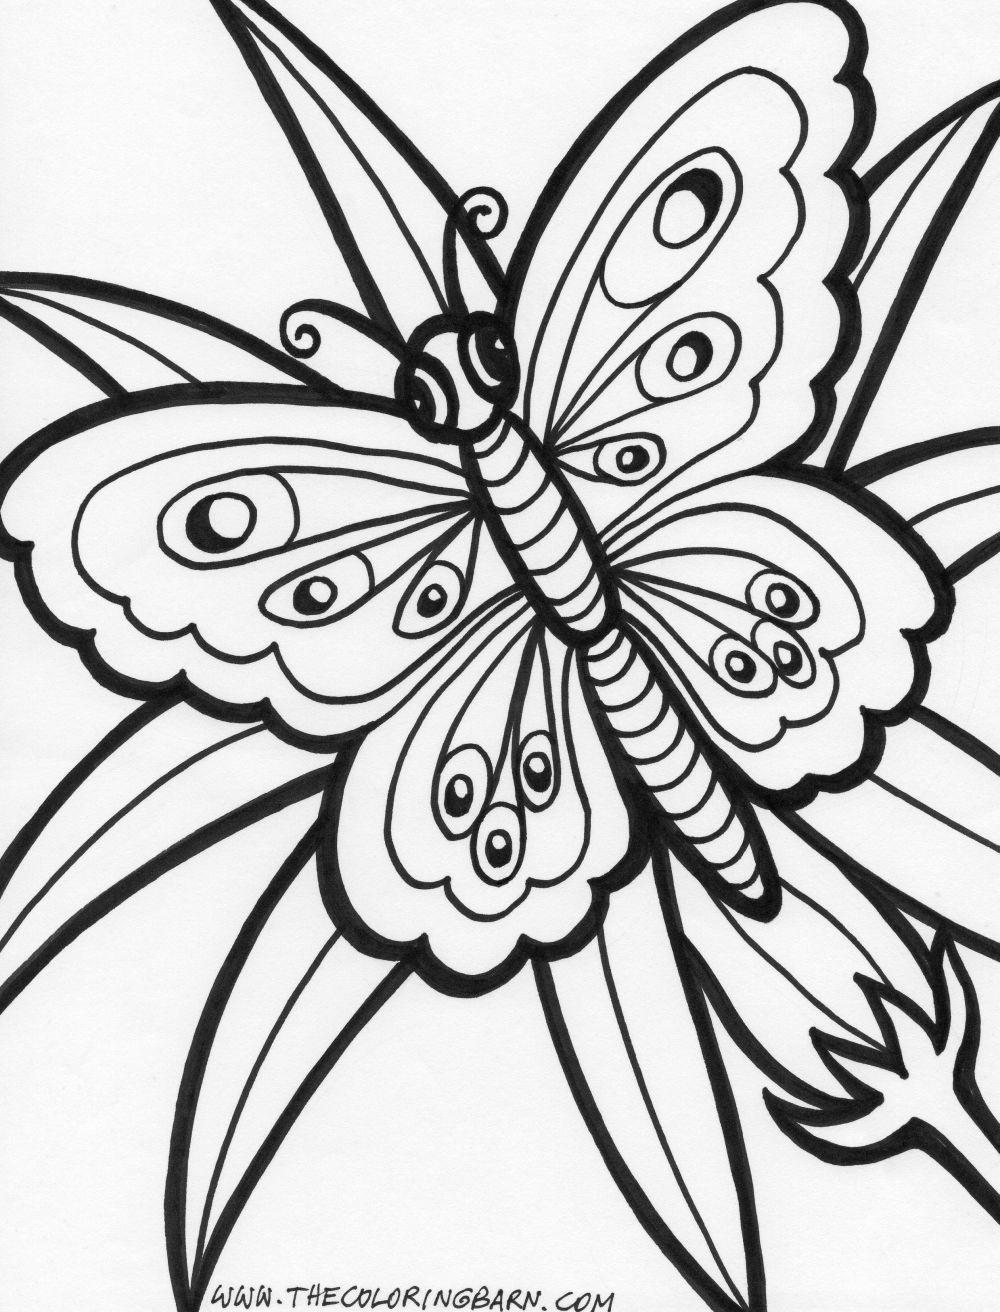 Coloring Pages For Kids To Print Out Printable Coloring Pages Free Download Best Printable Coloring